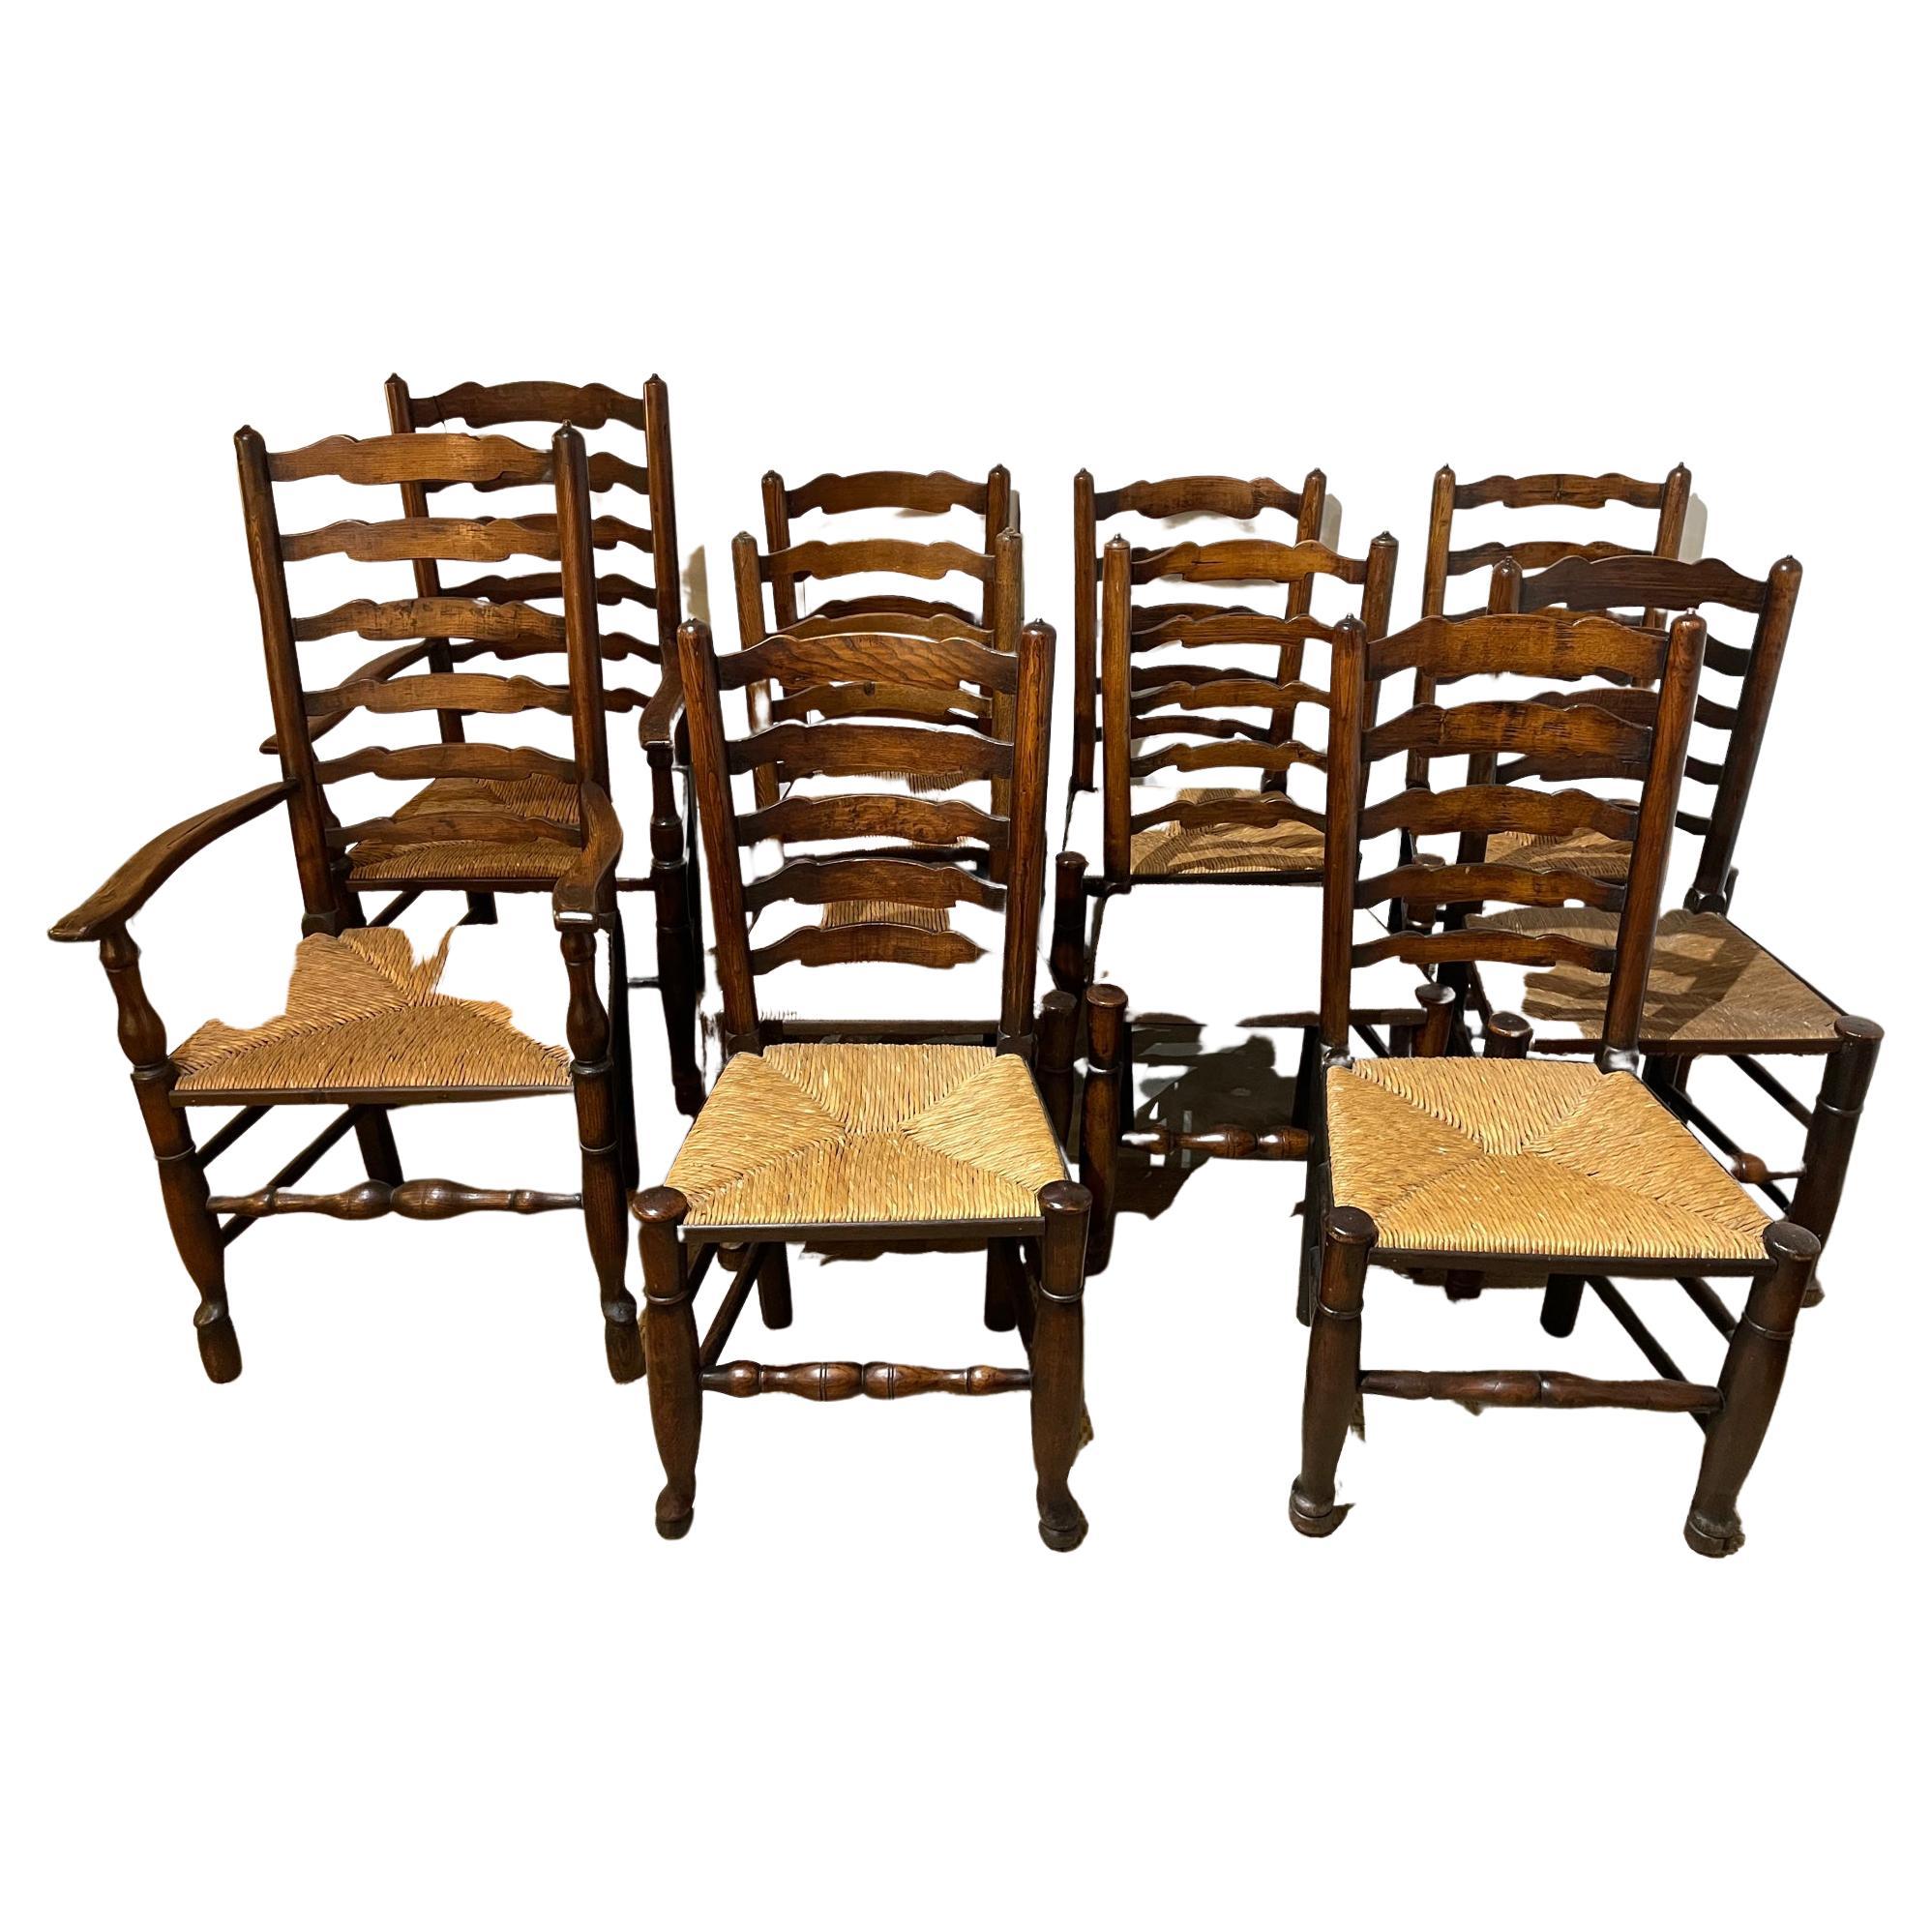 Great set of 8 antique English c. 1760 rush seat side chairs with 2 larger scale carvers/armchairs. Very sturdy with handsome wavy detail.